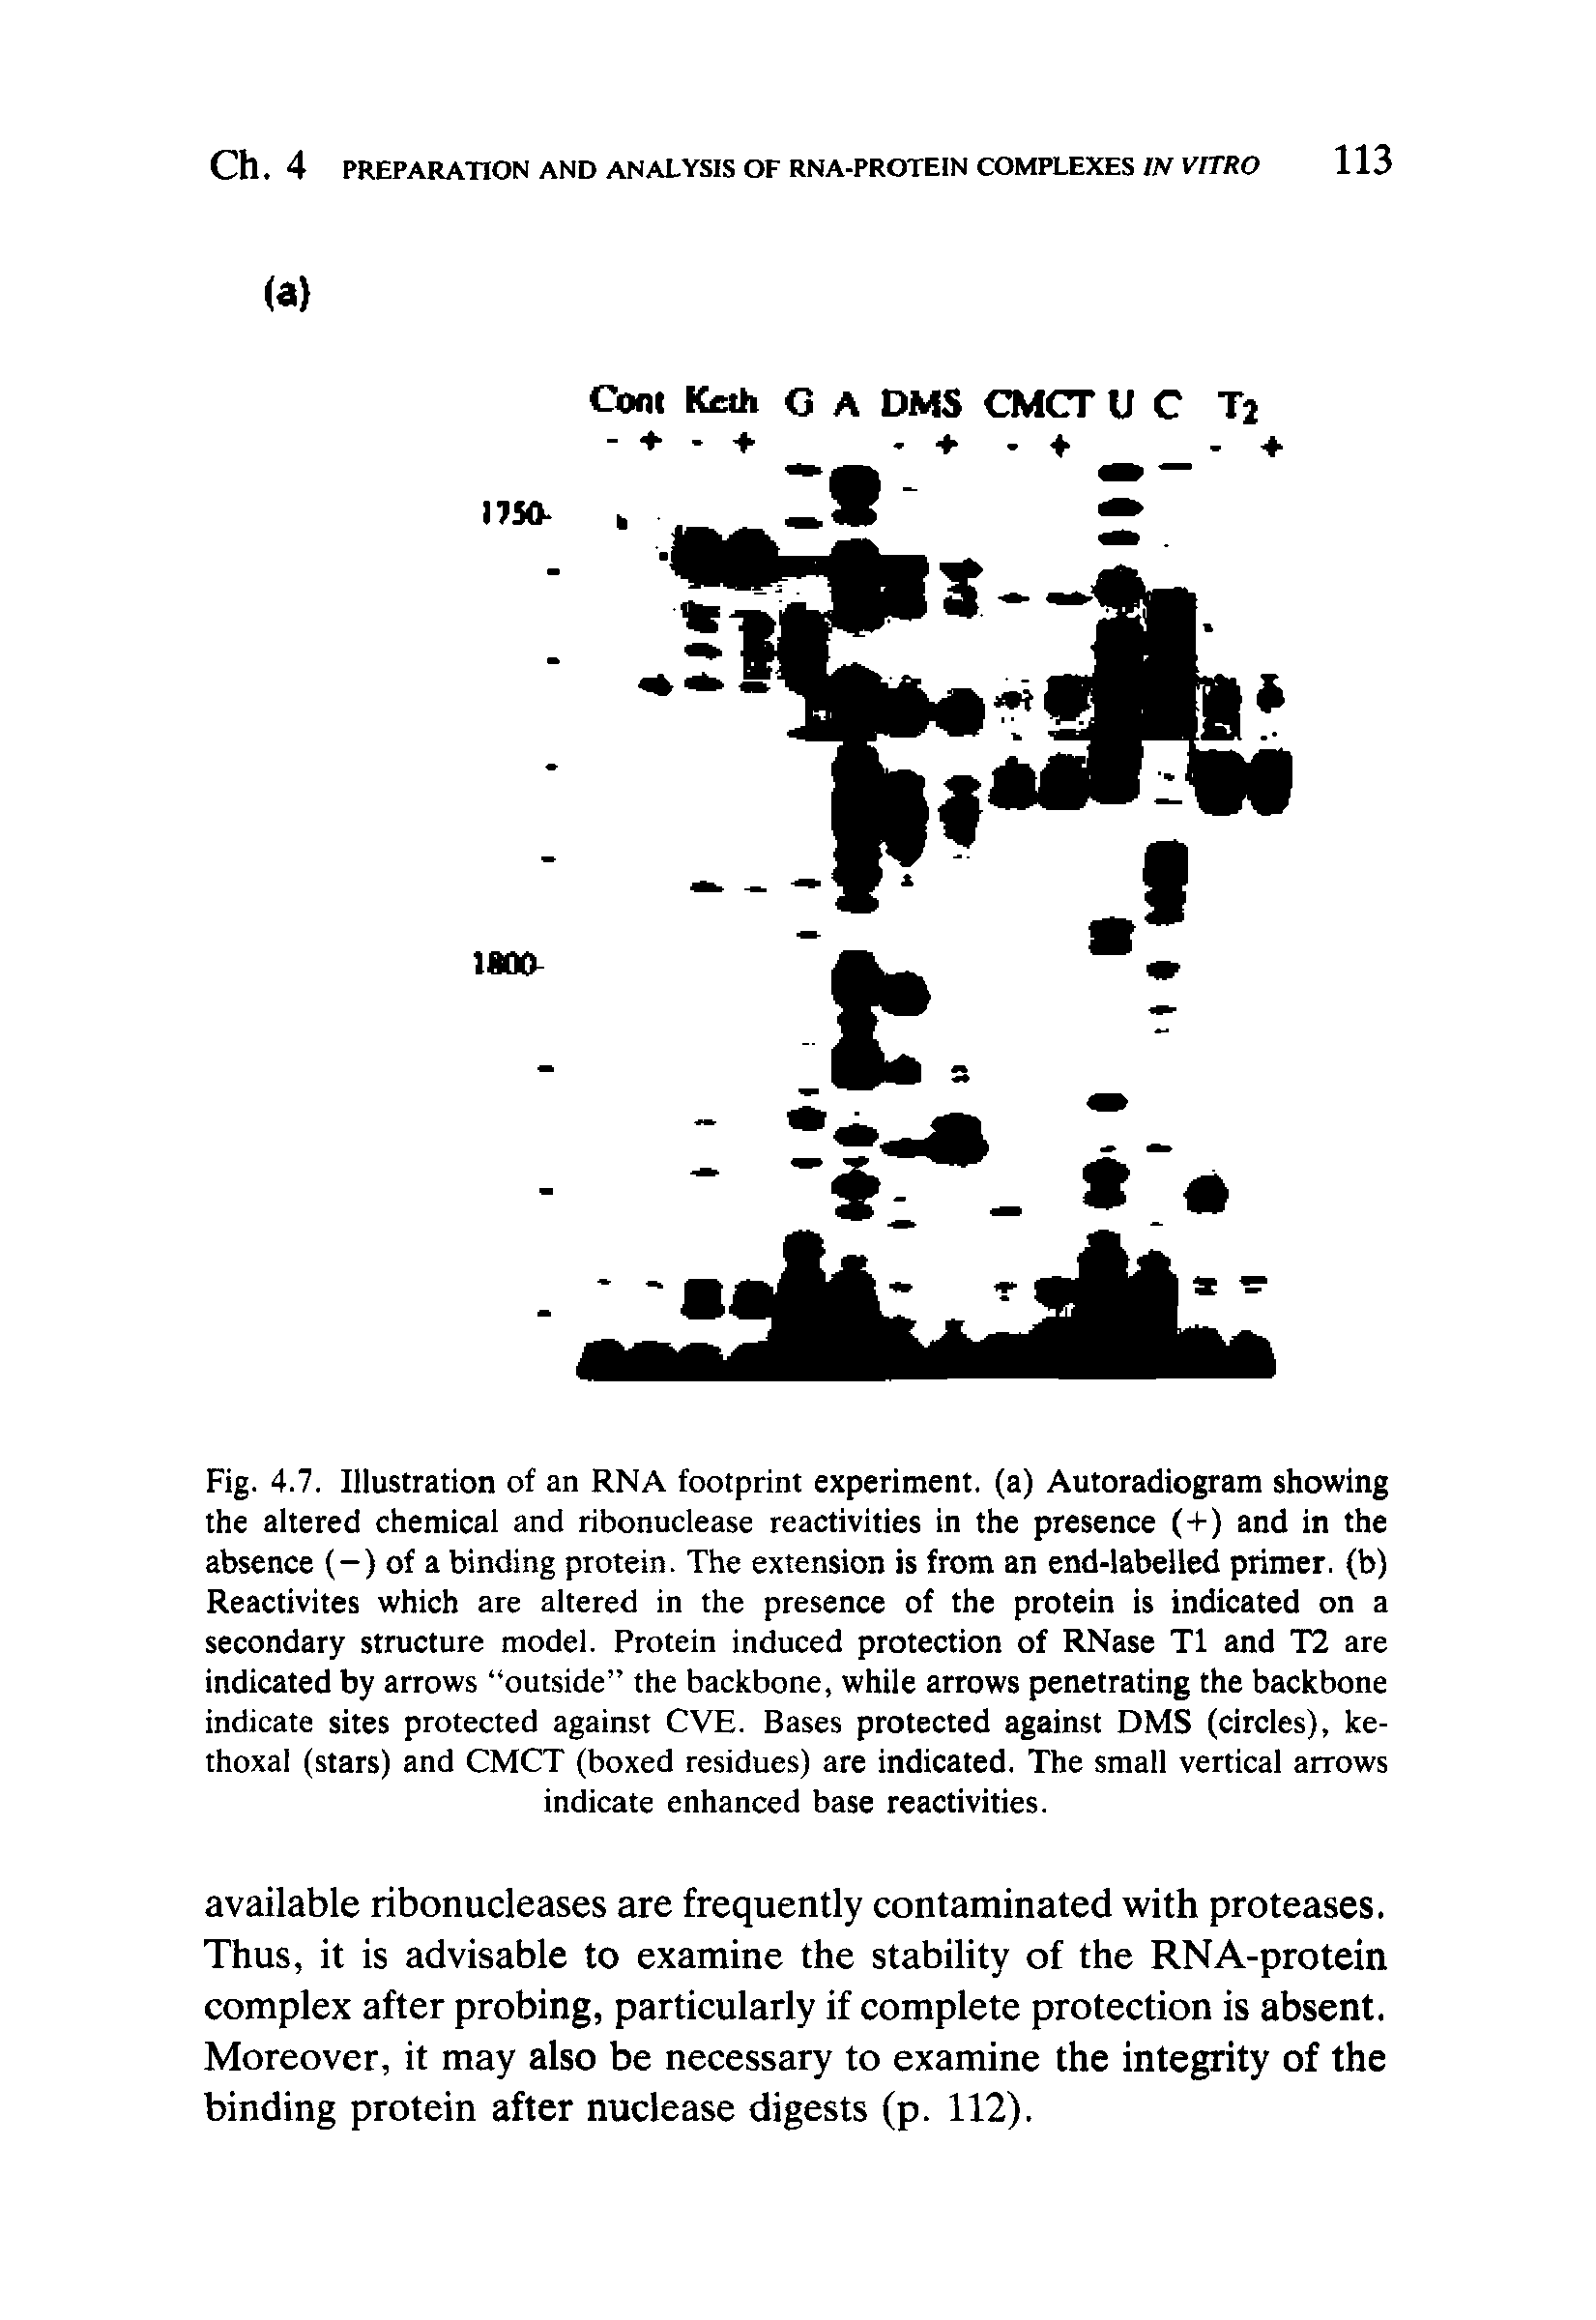 Fig. 4.7. Illustration of an RNA footprint experiment, (a) Autoradiogram showing the altered chemical and ribonuclease reactivities in the presence (+) and in the absence (-) of a binding protein. The extension is from an end-labelled primer, (b) Reactivites which are altered in the presence of the protein is indicated on a secondary structure model. Protein induced protection of RNase T1 and T2 are indicated by arrows outside the backbone, while arrows penetrating the backbone indicate sites protected against CVE. Bases protected against DMS (circles), ke-thoxal (stars) and CMCT (boxed residues) are indicated. The small vertical arrows indicate enhanced base reactivities.